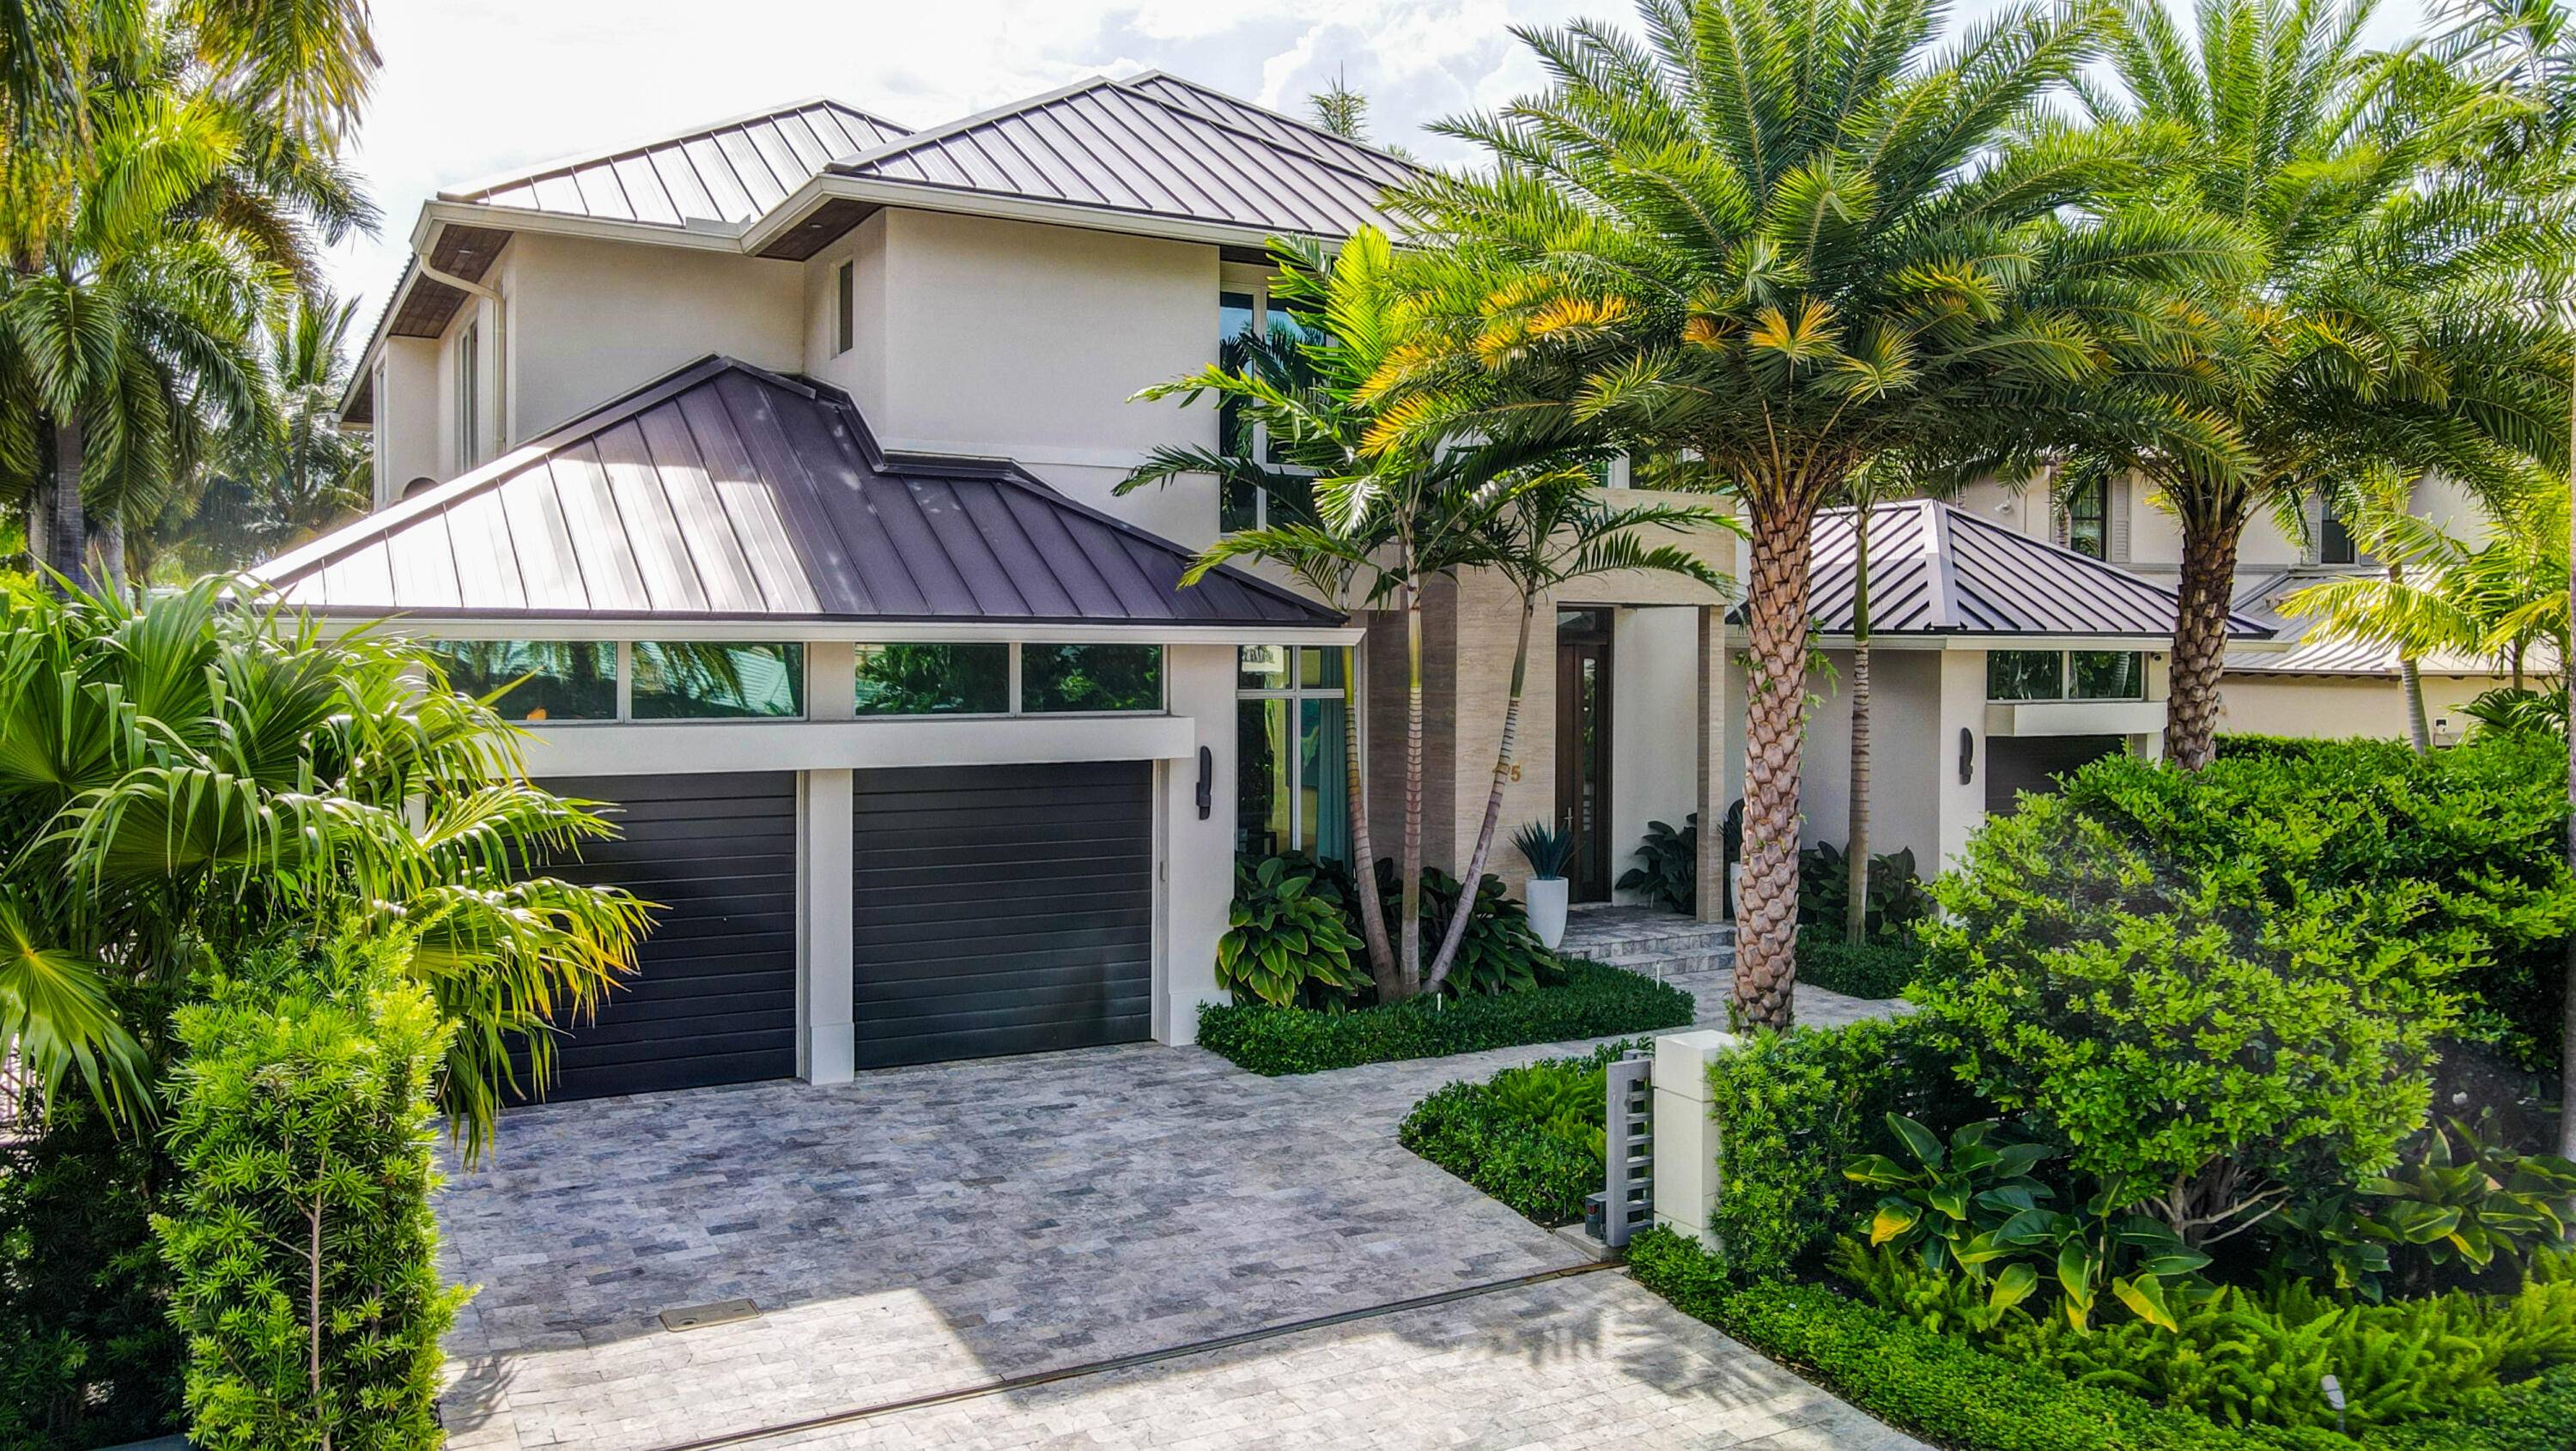 Modern deepwater Las Olas Isles home with striking architecture, sophisticated floor plan and finishes, and water views from all main living areas.